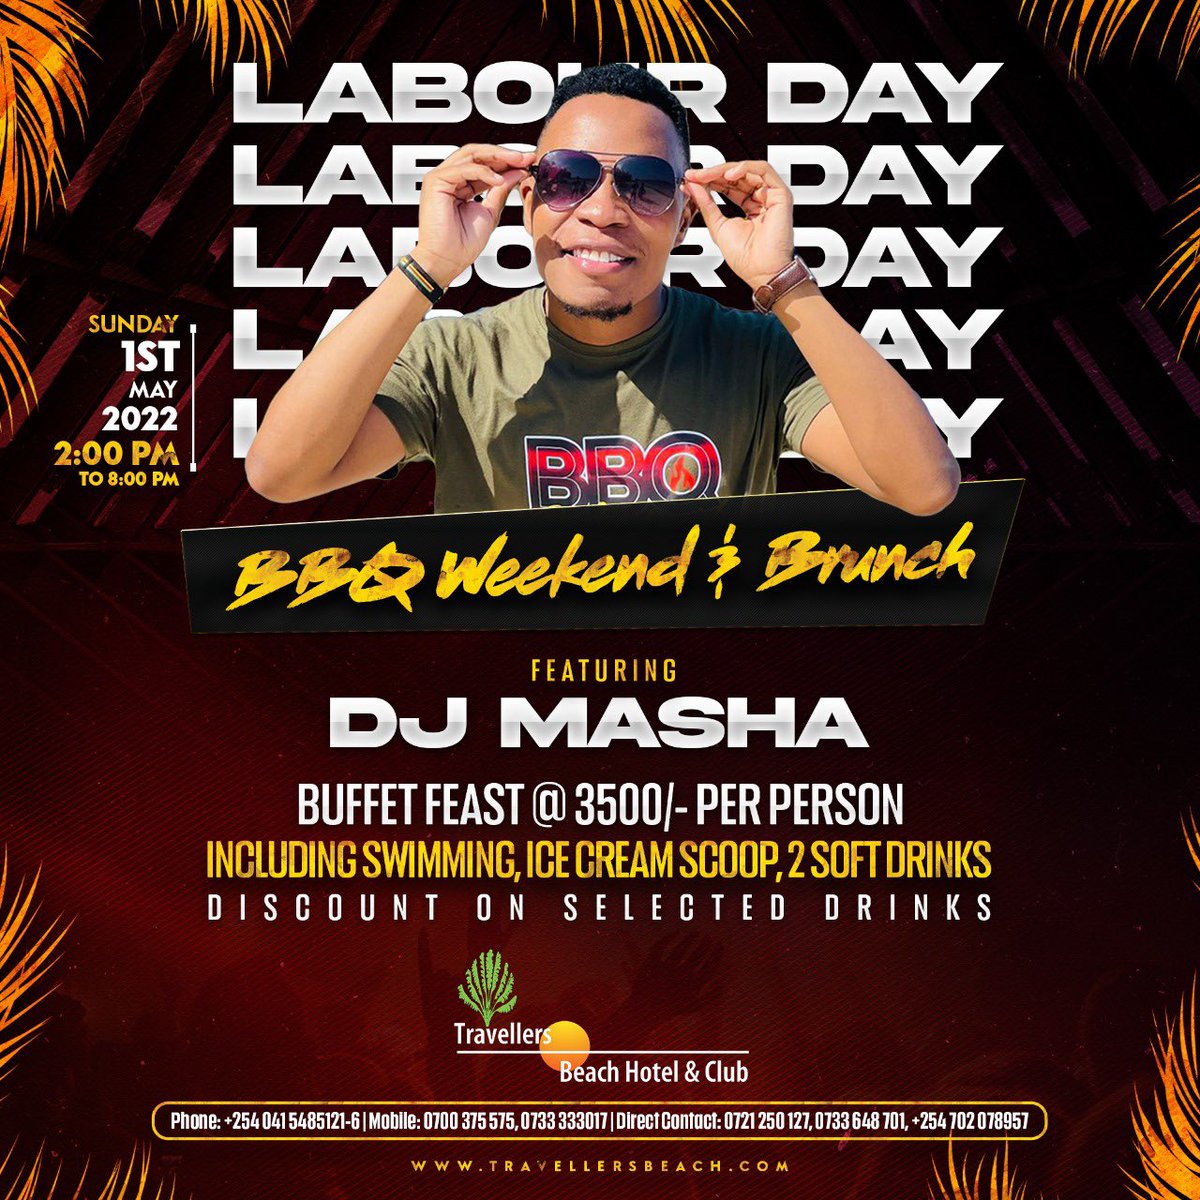 Exclusive Labour Day party 🇰🇪 at the Beach inside @travellersbhc Today from 2pm. Come through with your loved one. 🎉⛱ #BarbecueWeekend #Events254 #254fashion #254publicity #IgersKenya #MagicalKenya #TembeaKenya #Weekend #explorepage